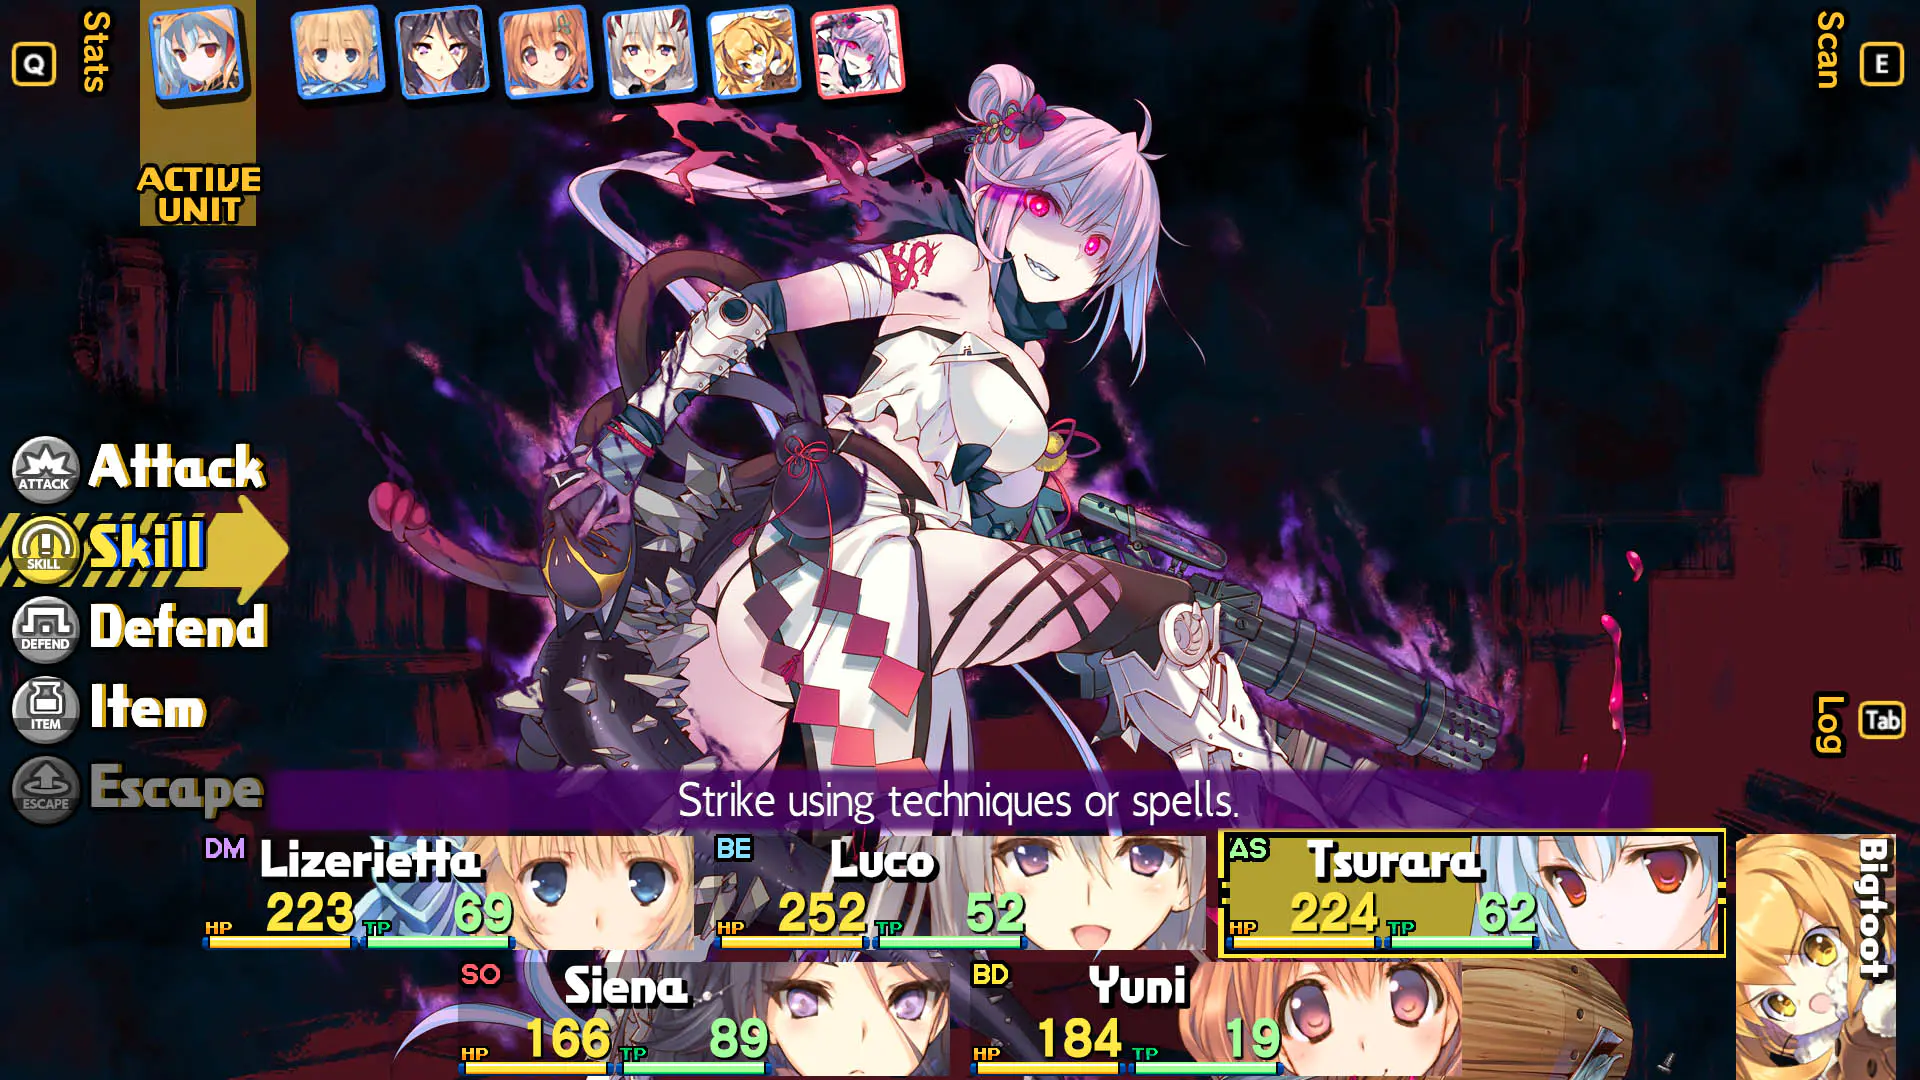 A screenshot from Dungeon Travelers 2, showcasing a character and fanservice